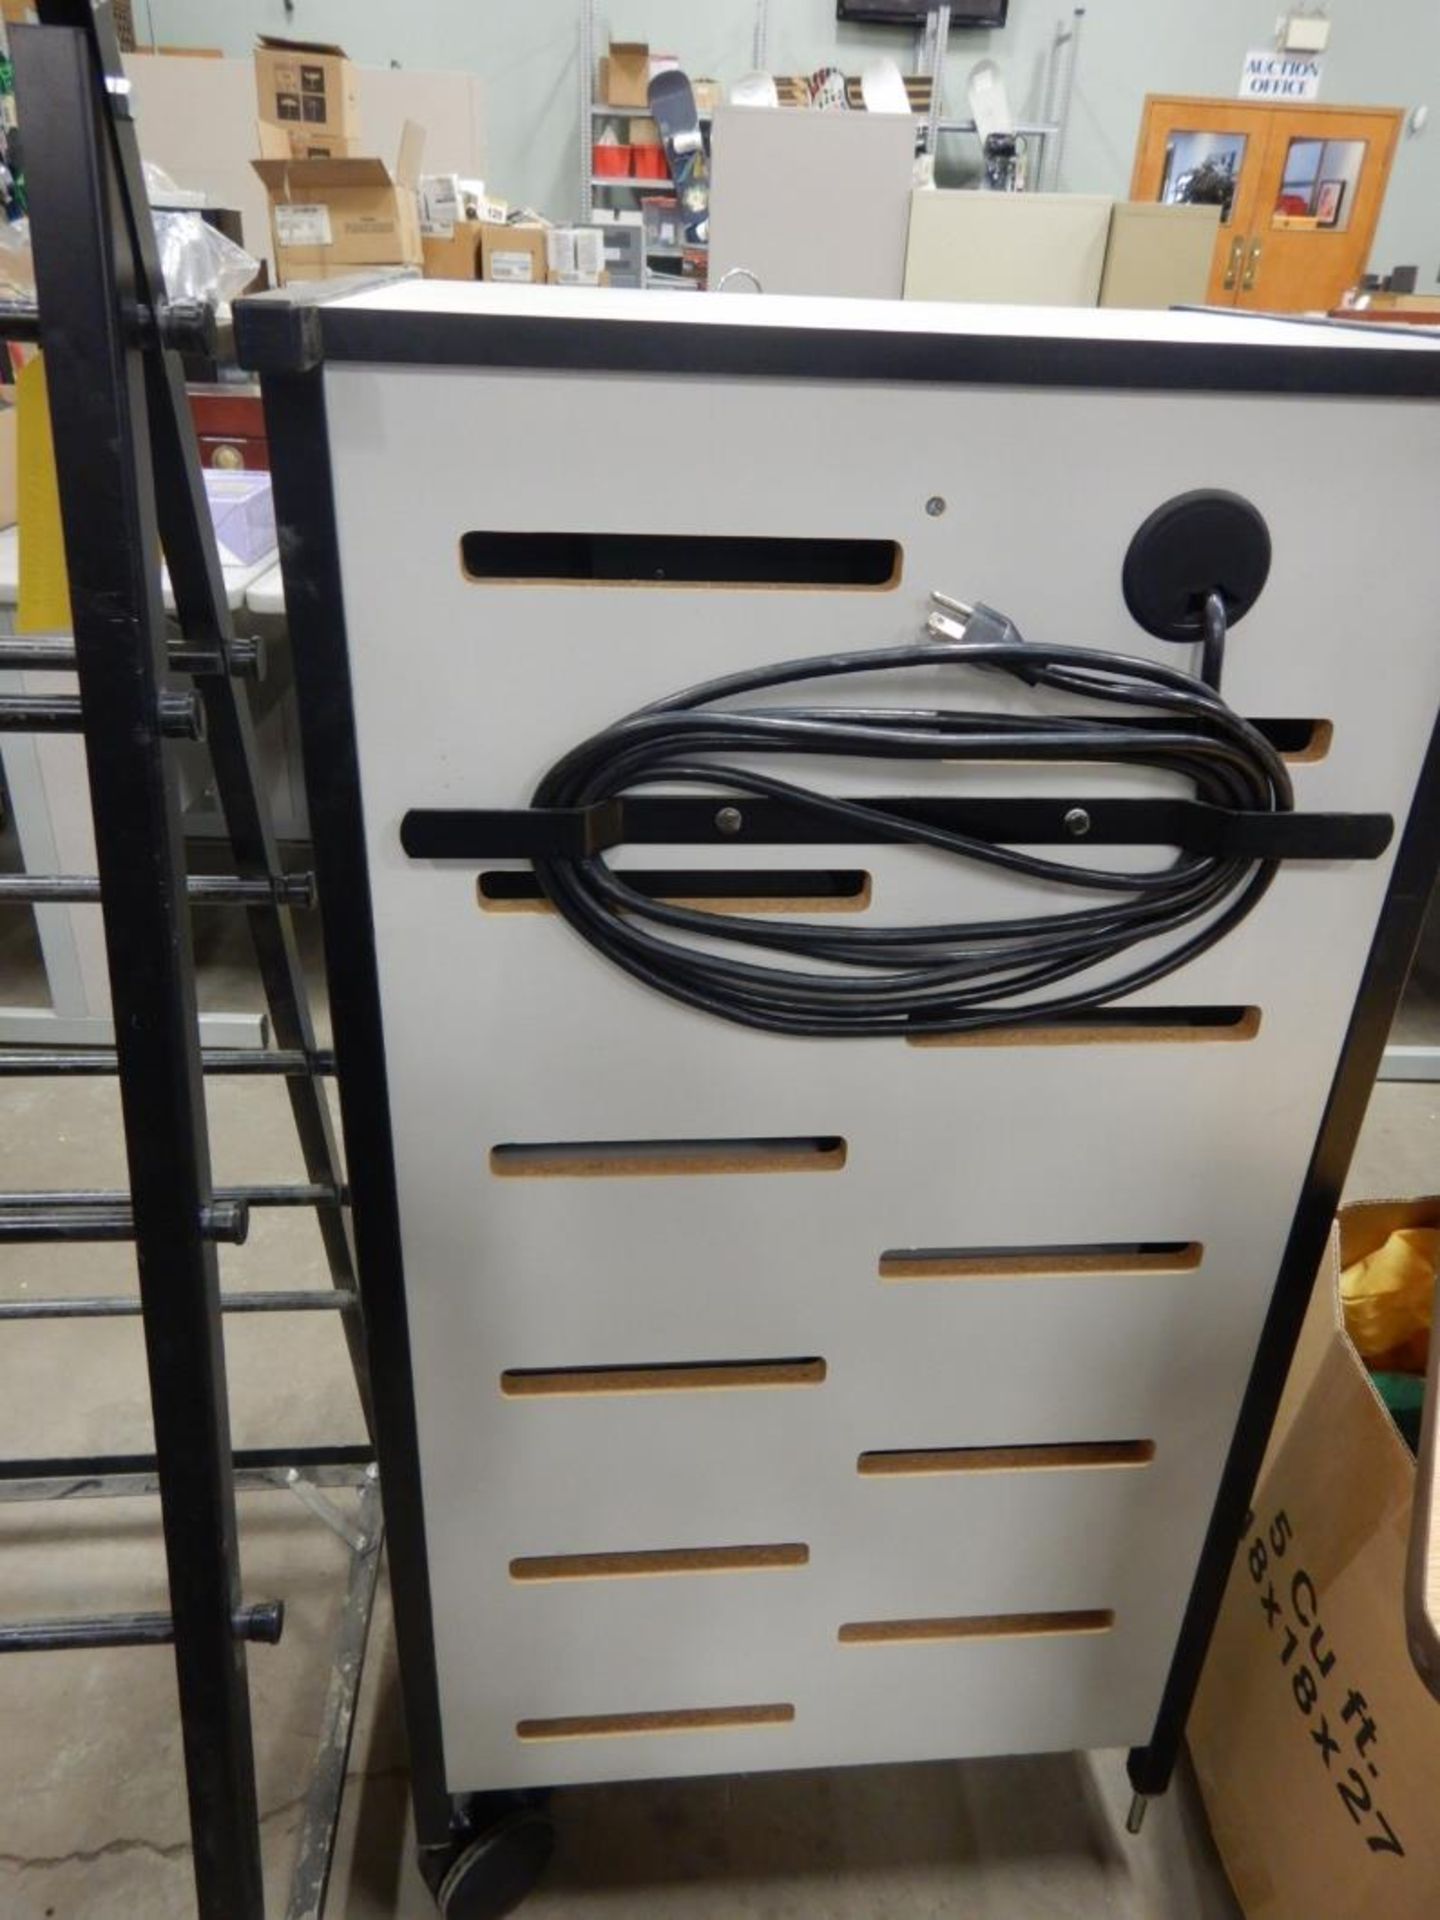 MOBILE STORAGE CABINET W/ CASTERS - ONE CASTER IS BROKEN. - Image 4 of 4